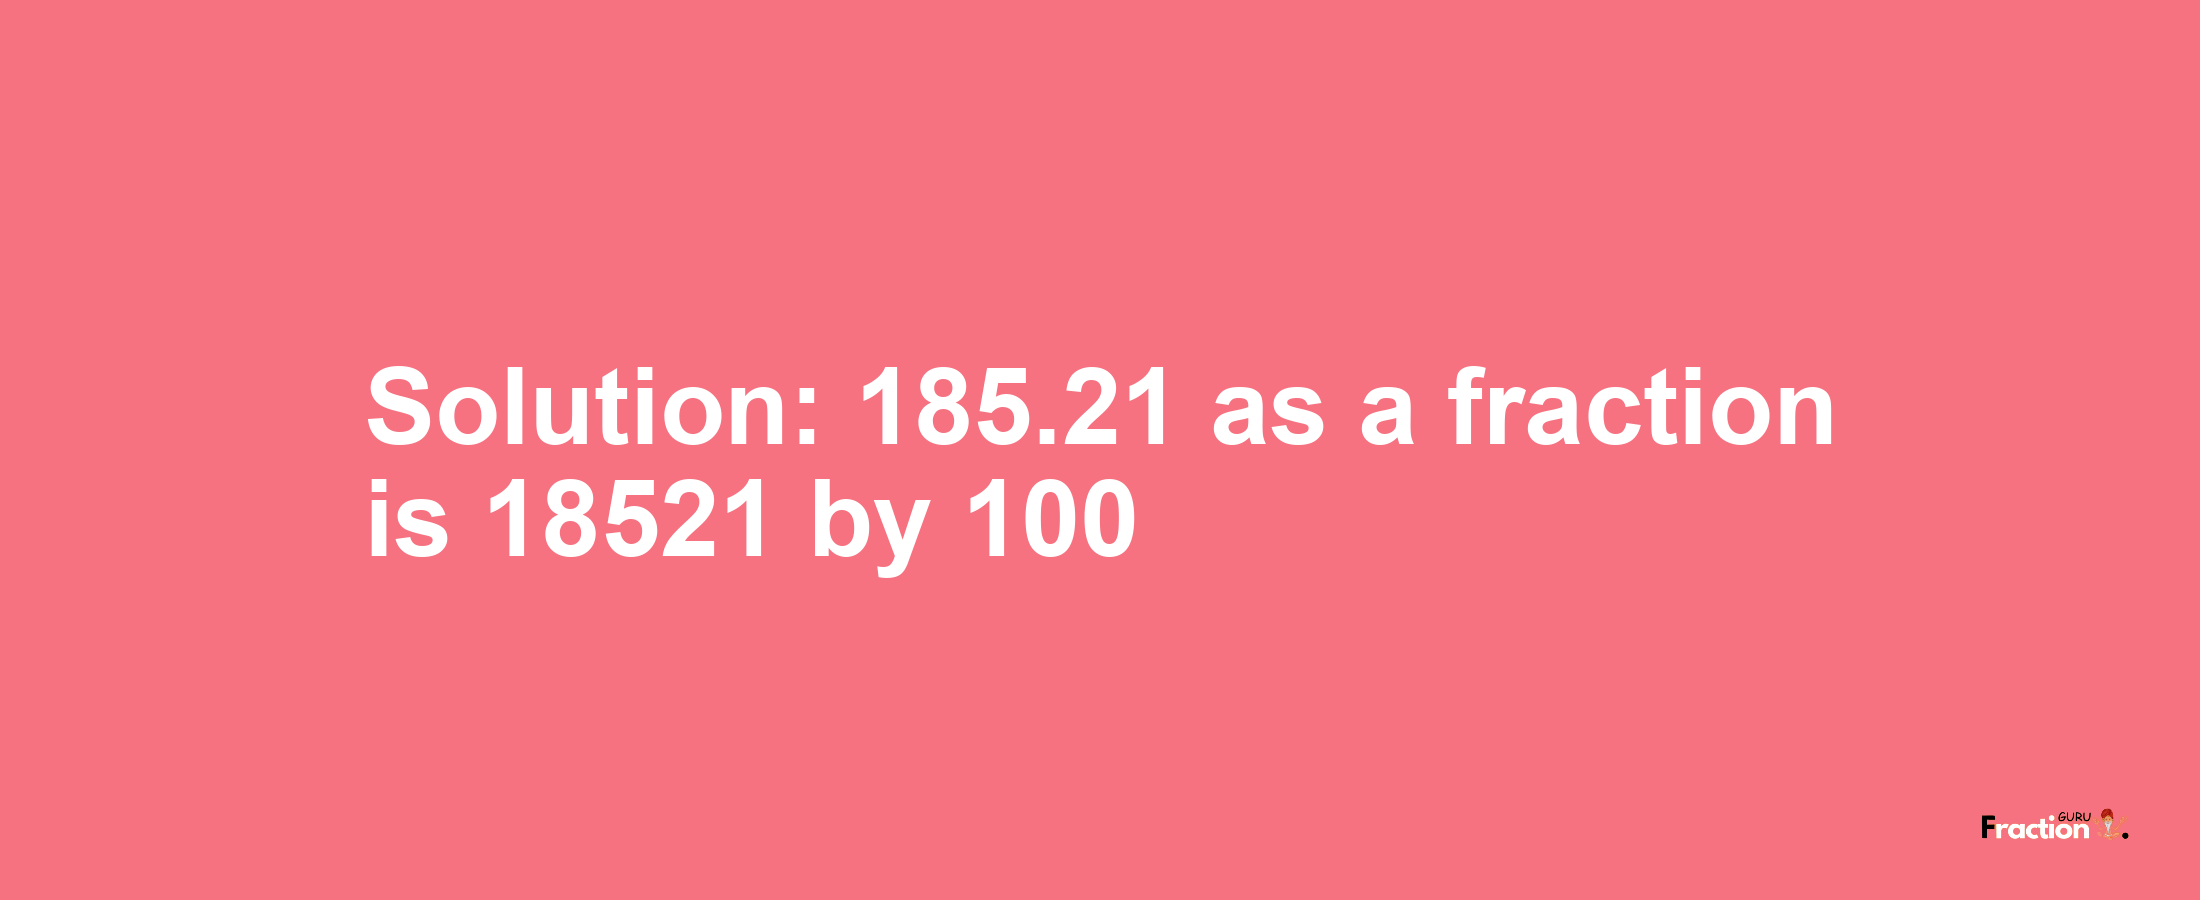 Solution:185.21 as a fraction is 18521/100